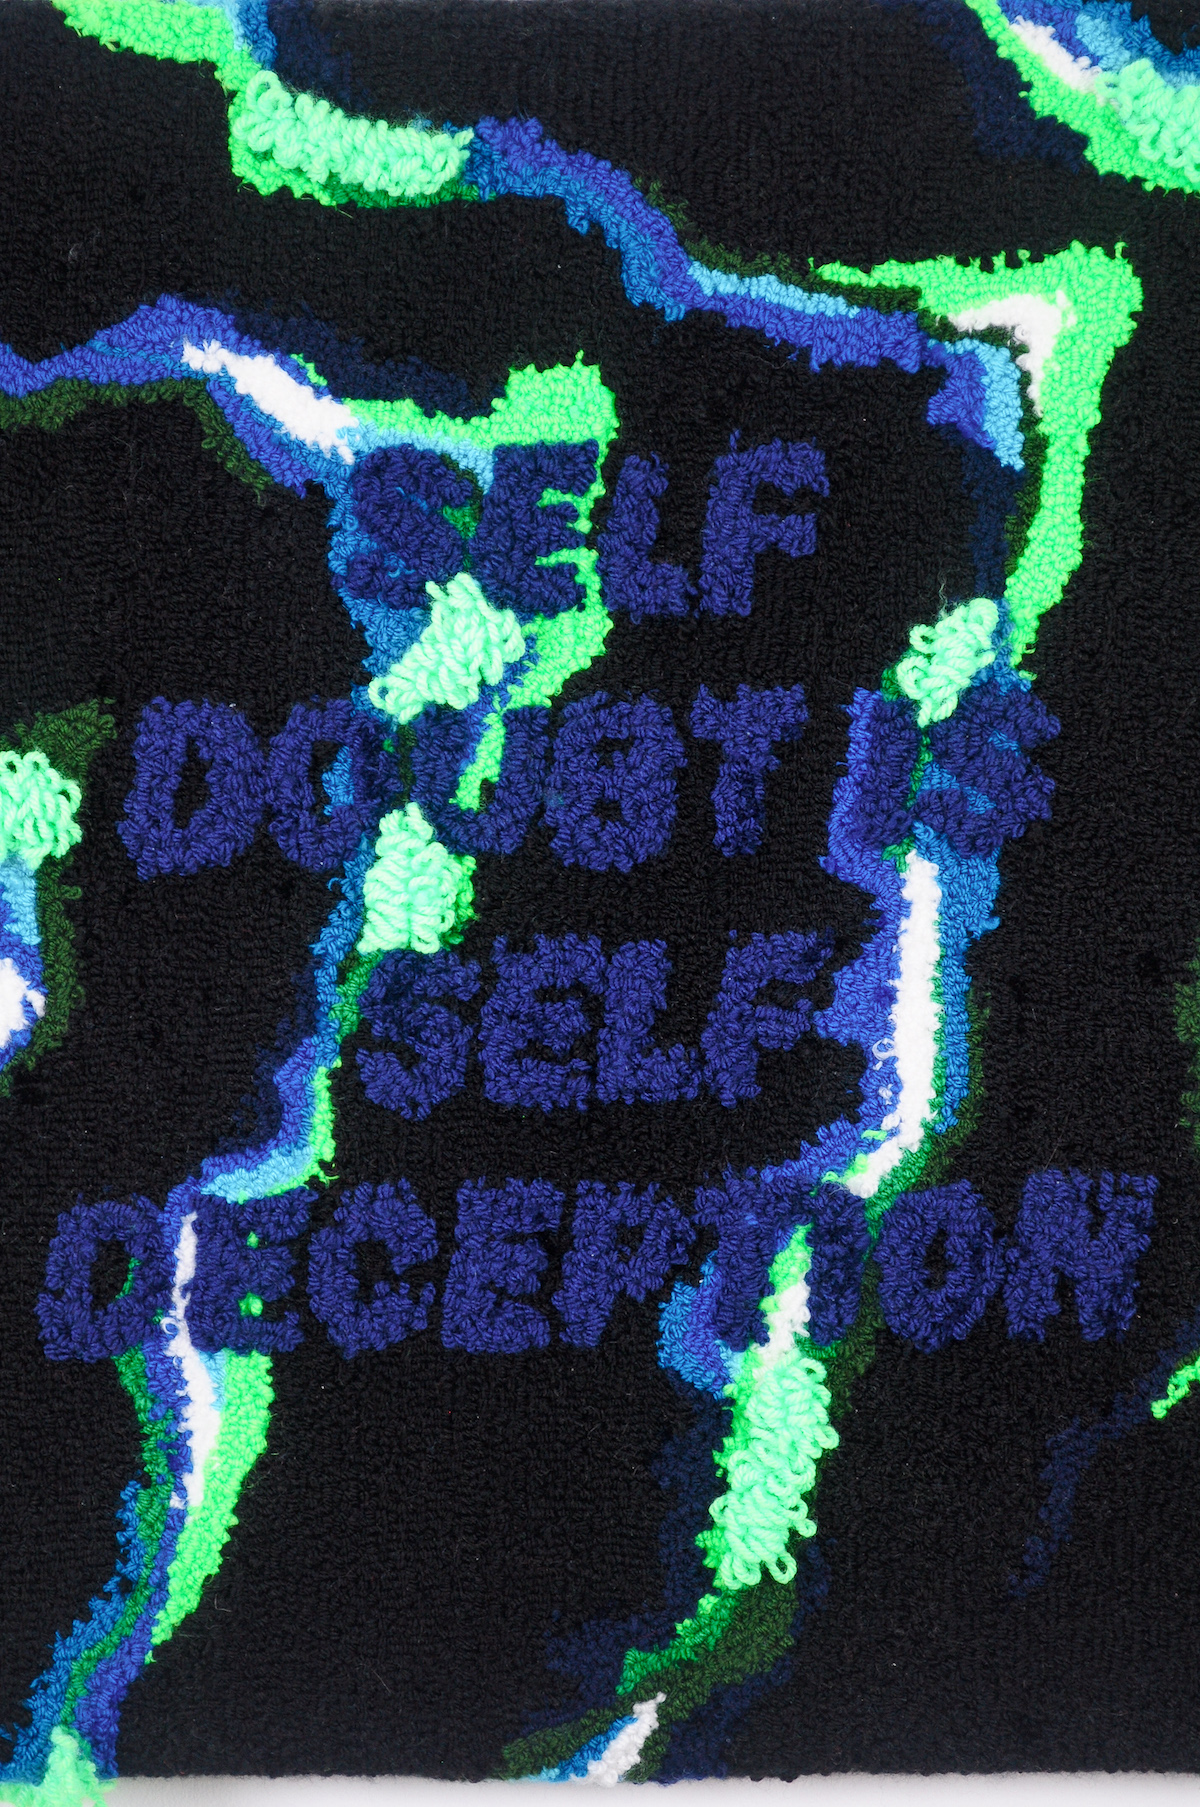 Fabric glued together in neon green, blue, and black with text